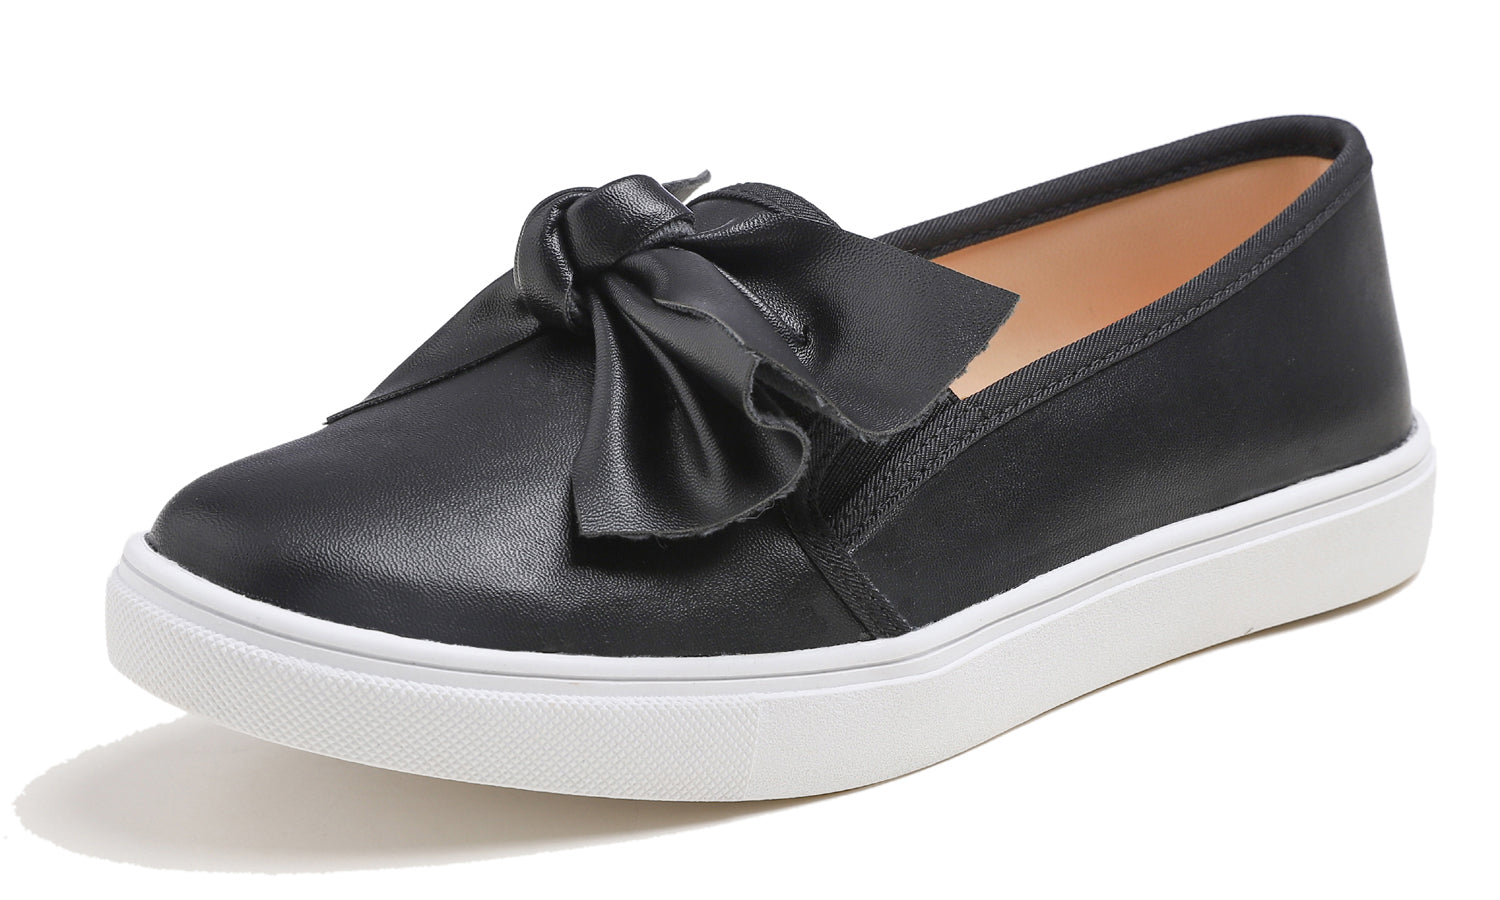 Feversole Women's Casual Slip On Sneaker Comfort Cupsole Loafer Flats Black Bow Vegan Leather